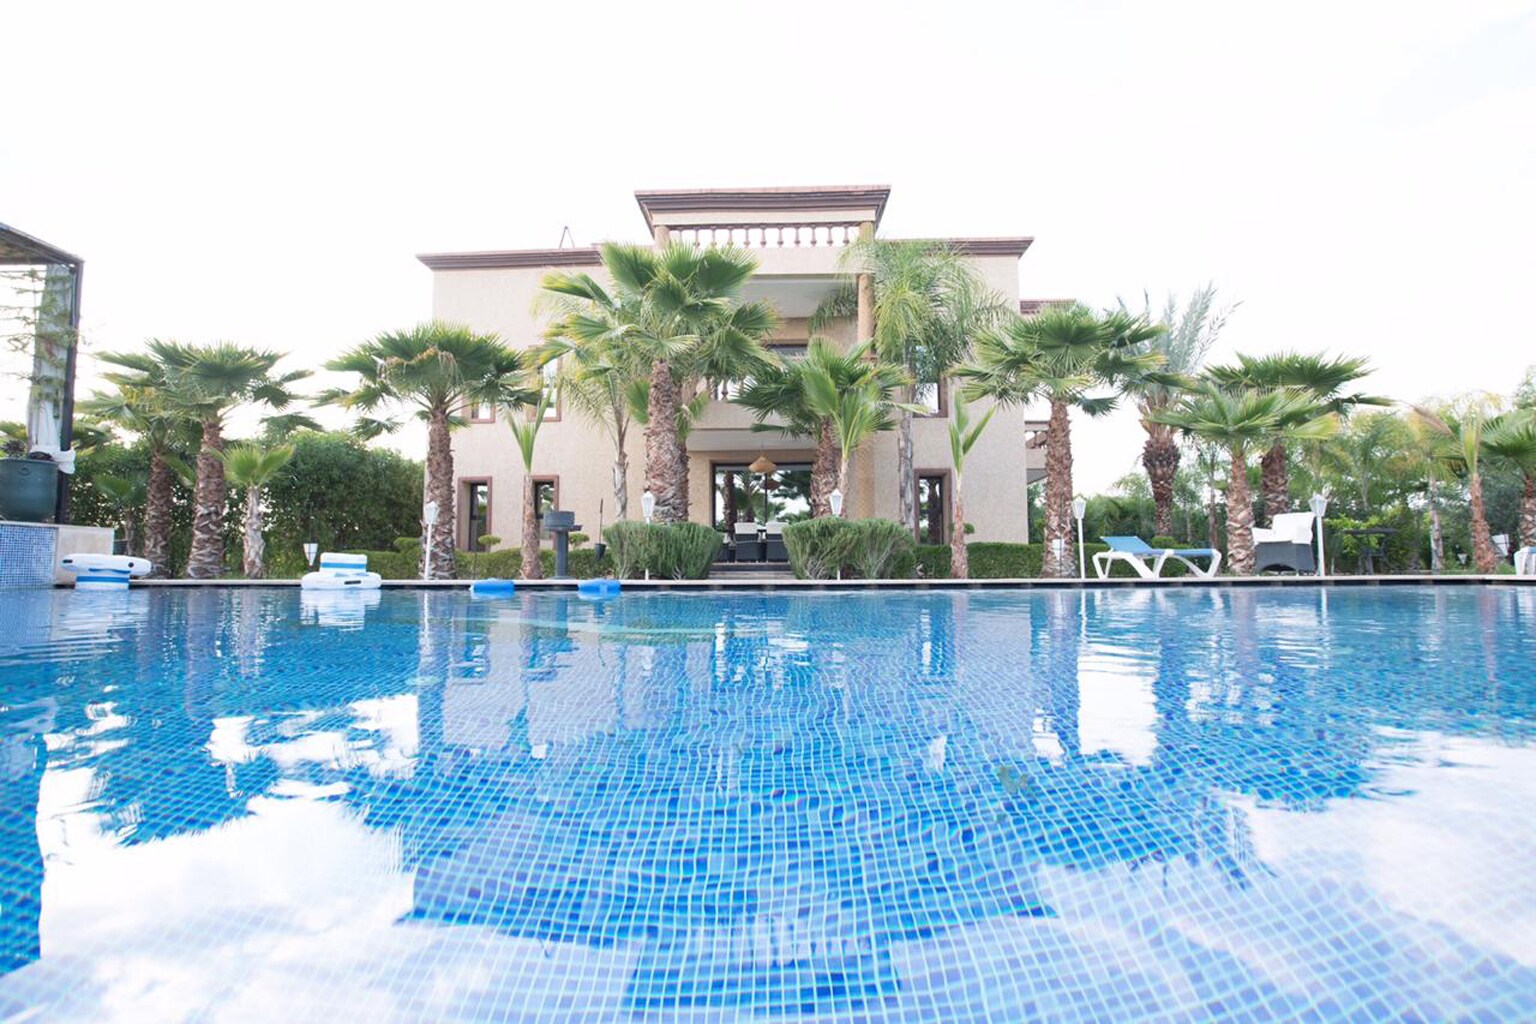 Property Image 1 - Villa with private pool and breakfast Marrakech - by feelluxuryholidays